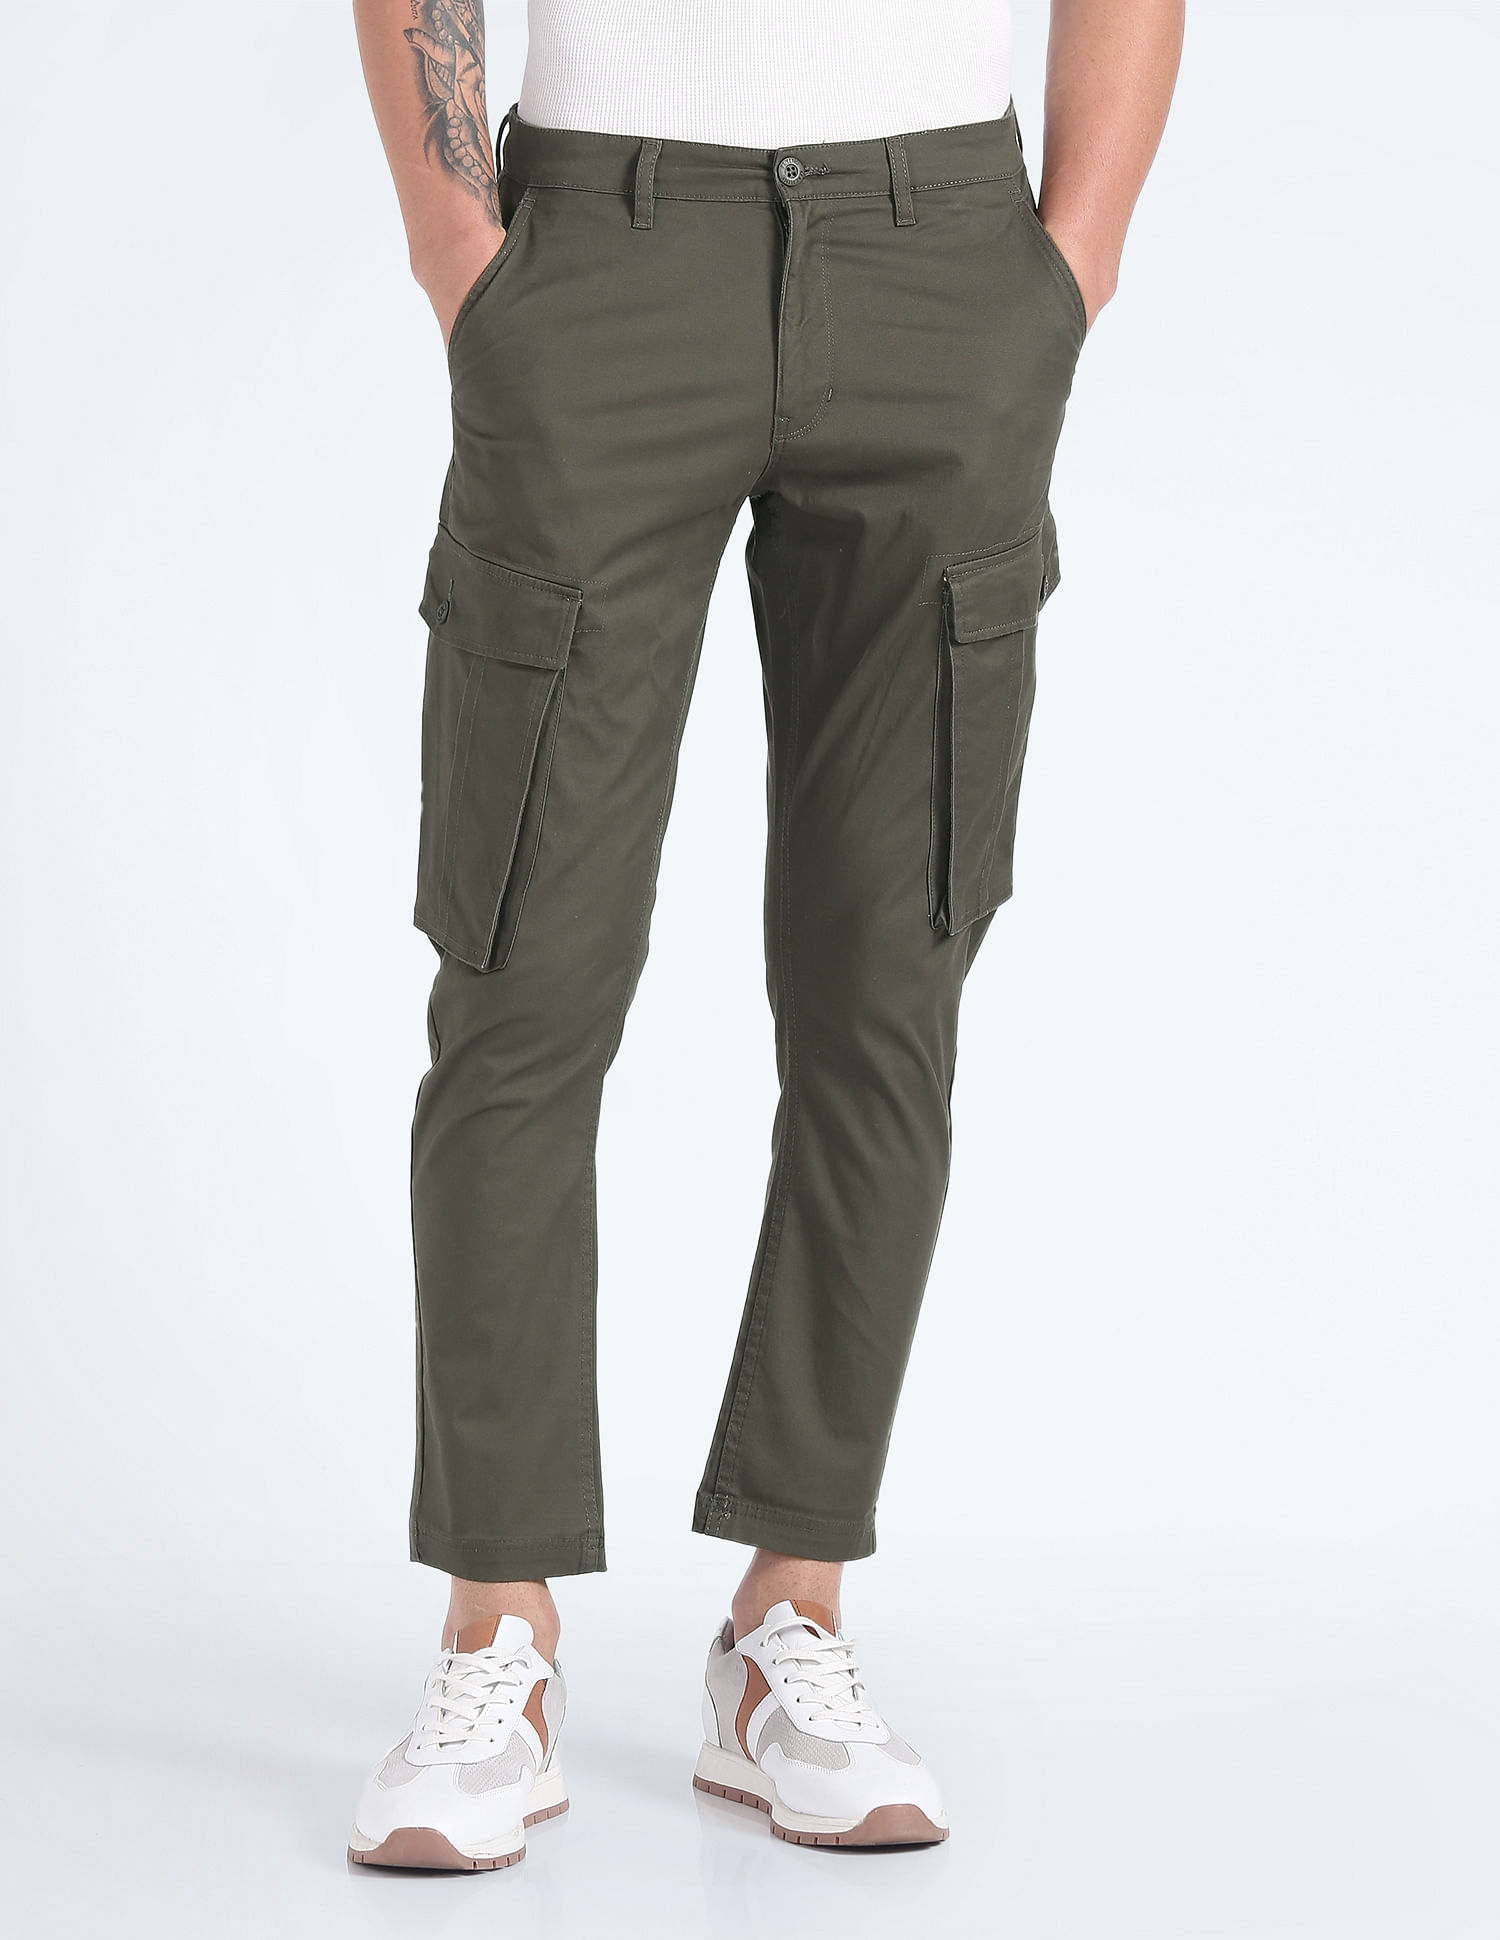 Only & Sons Black Slim Fit Cargo Trousers | New Look